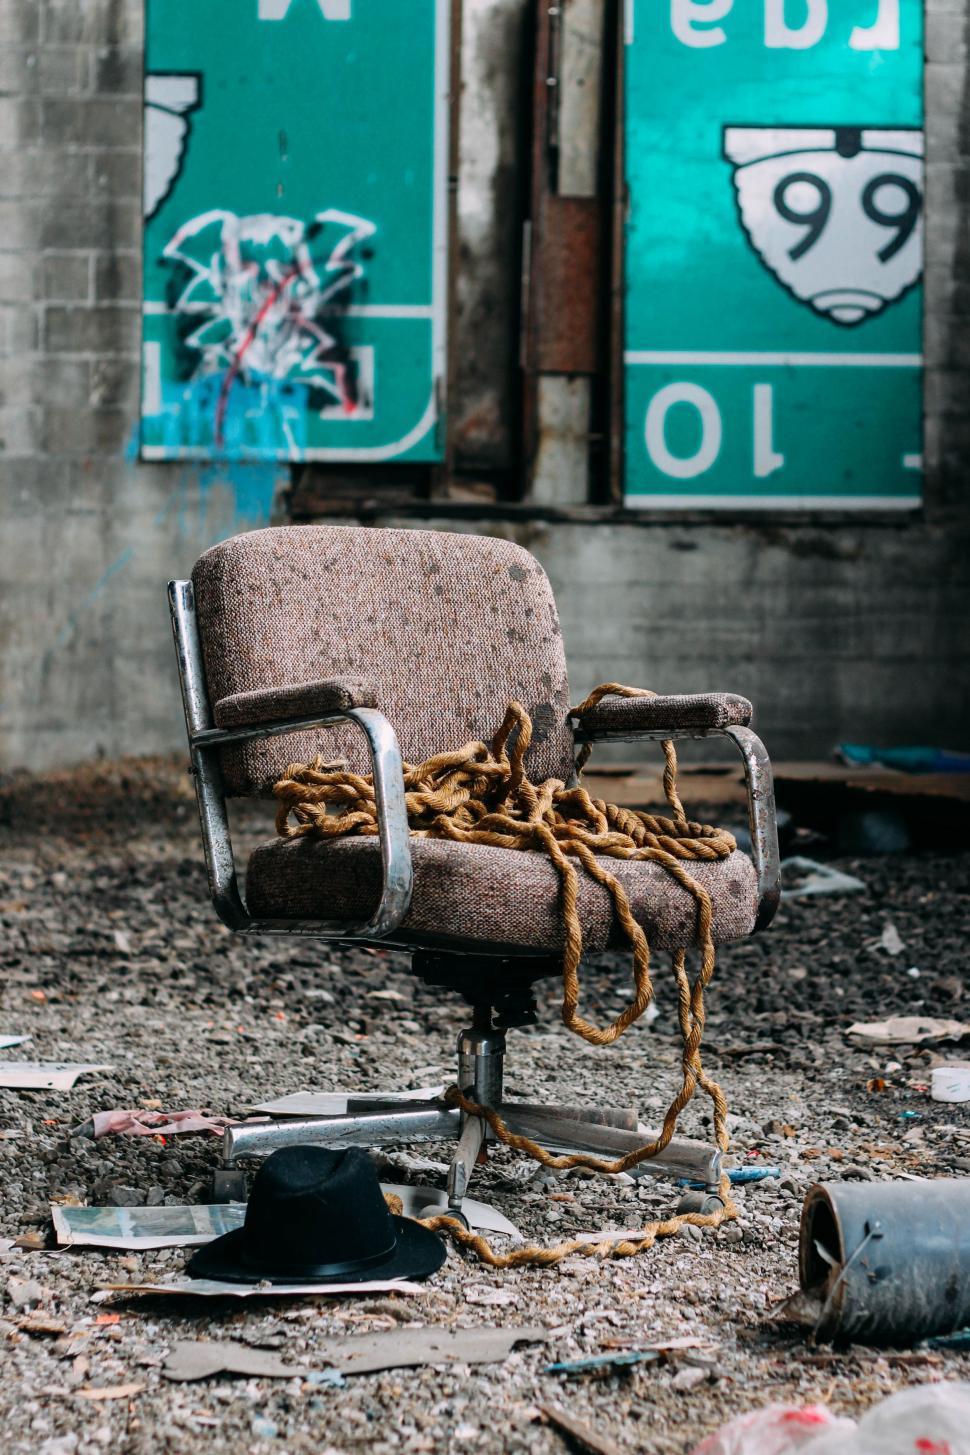 Free Image of Old Chair Outside Building 